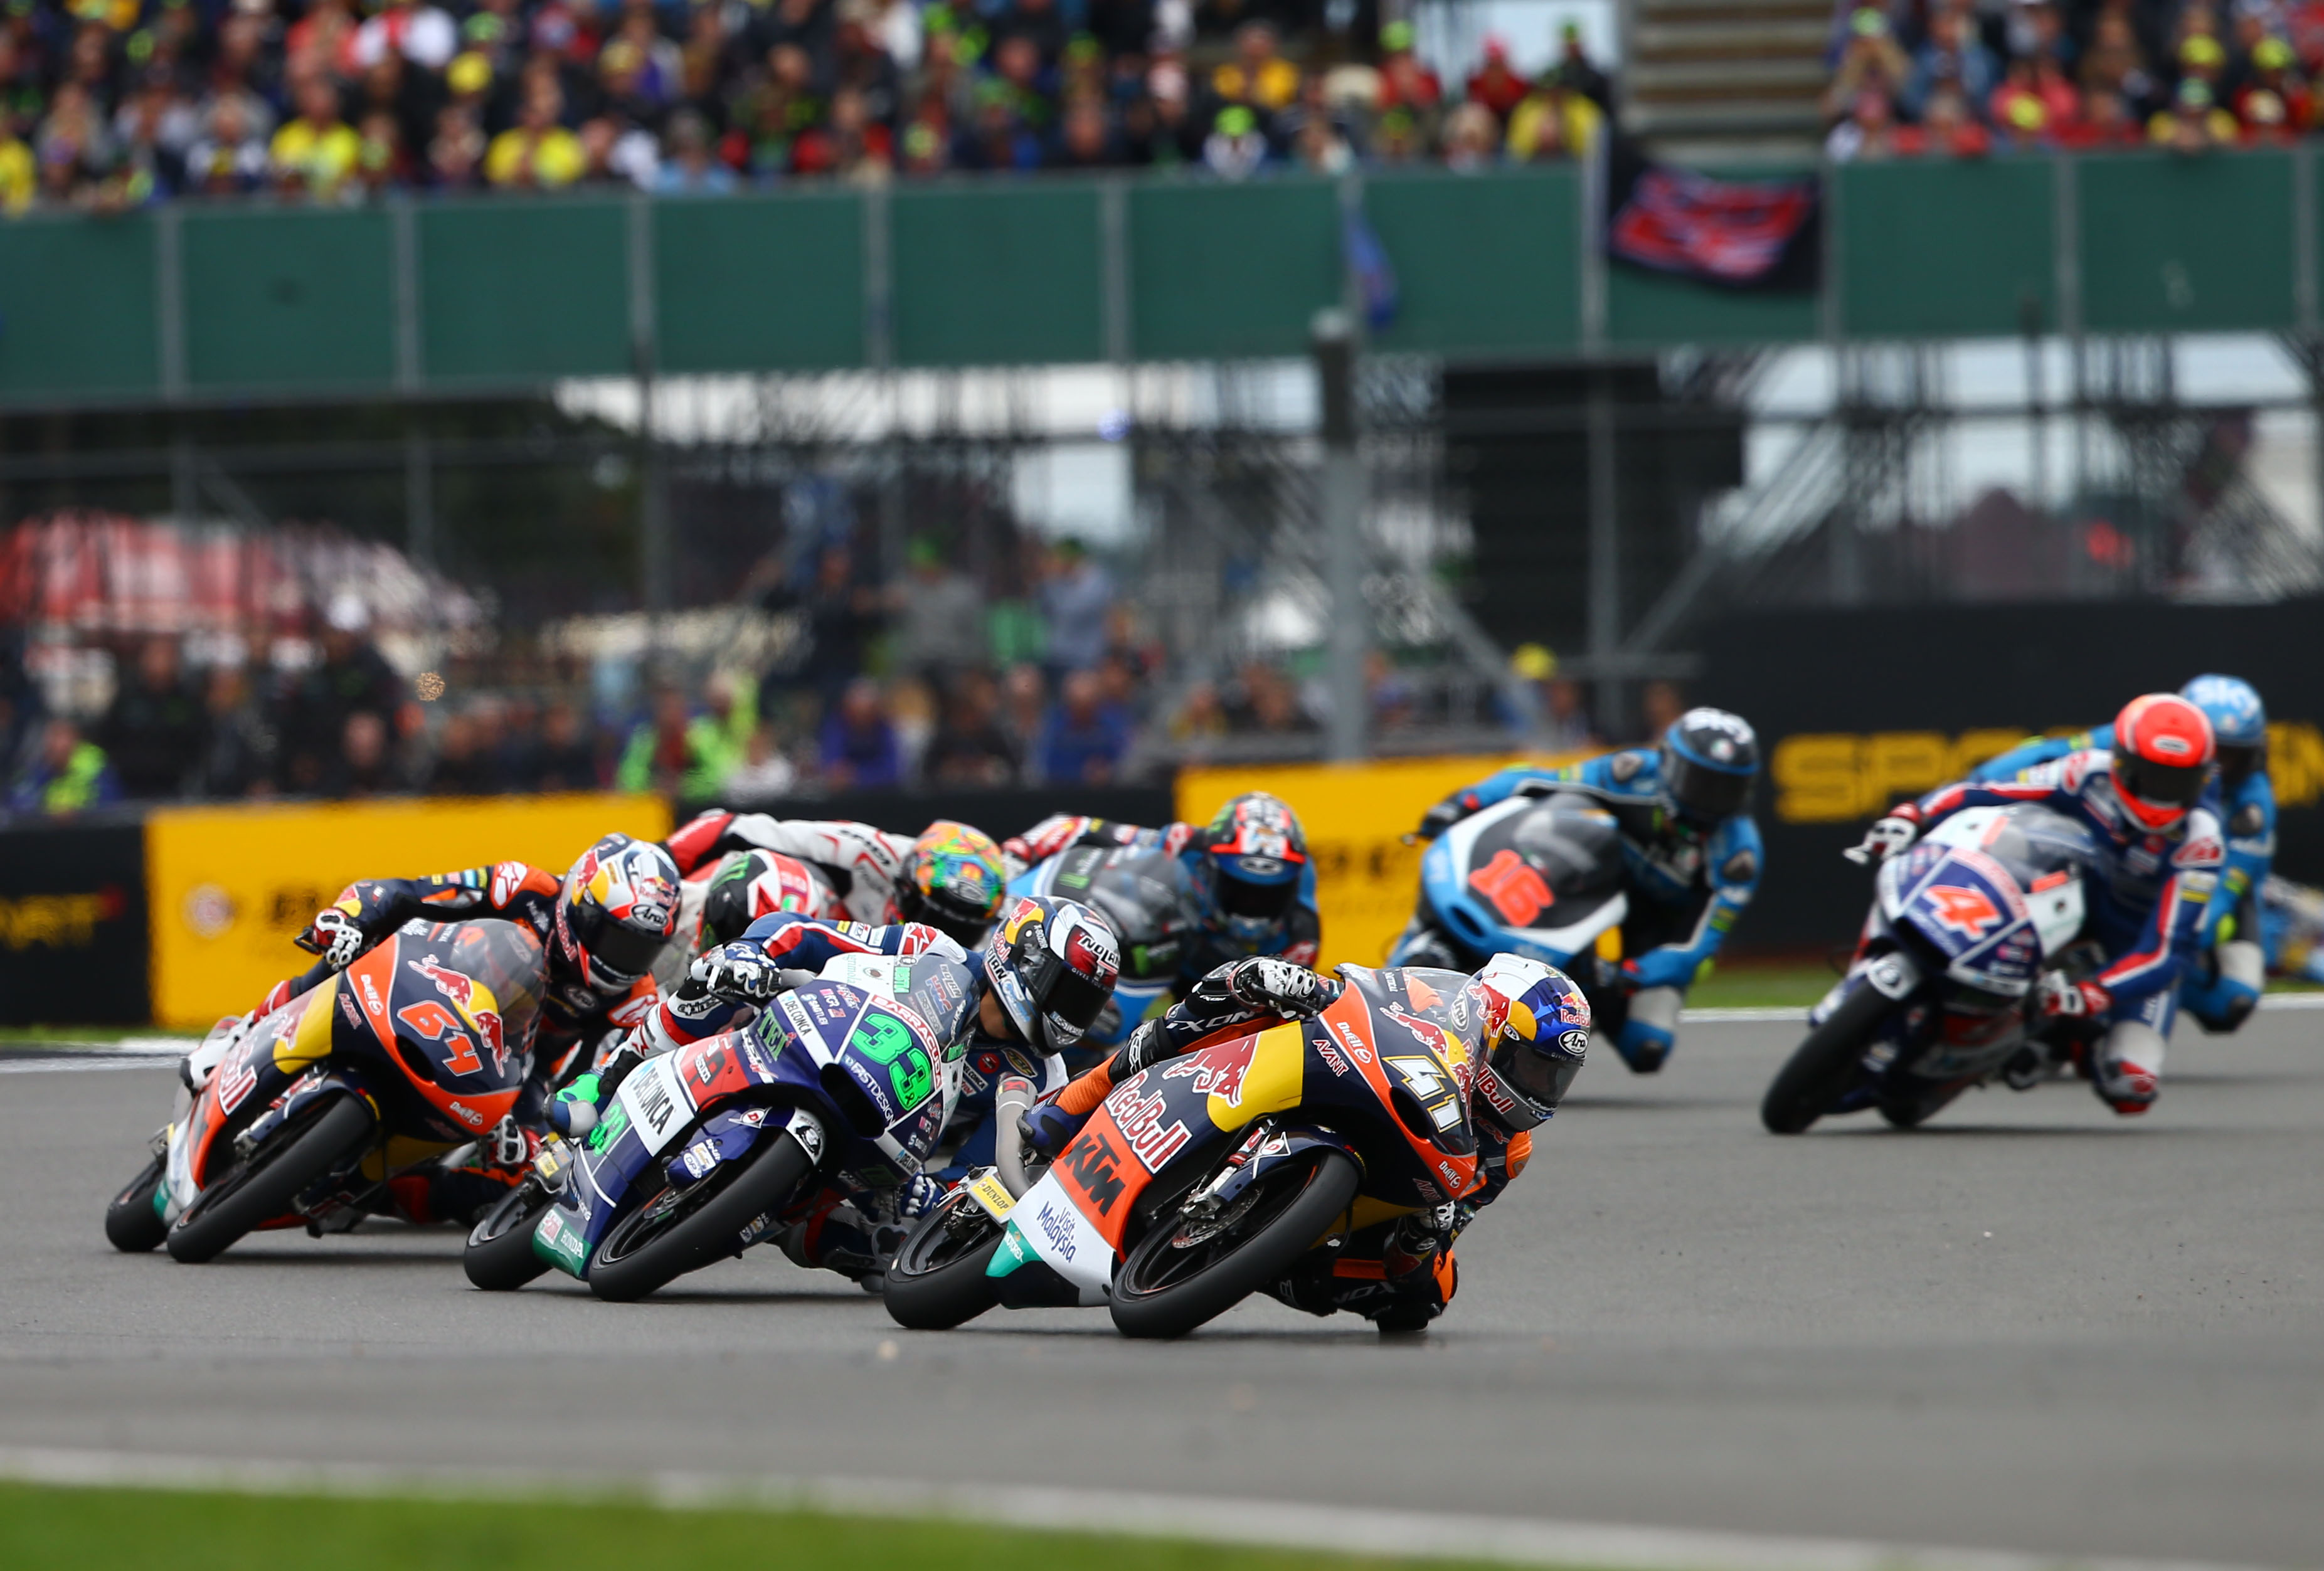 Rd 12 Silverstone 3rd, first podium in Moto3